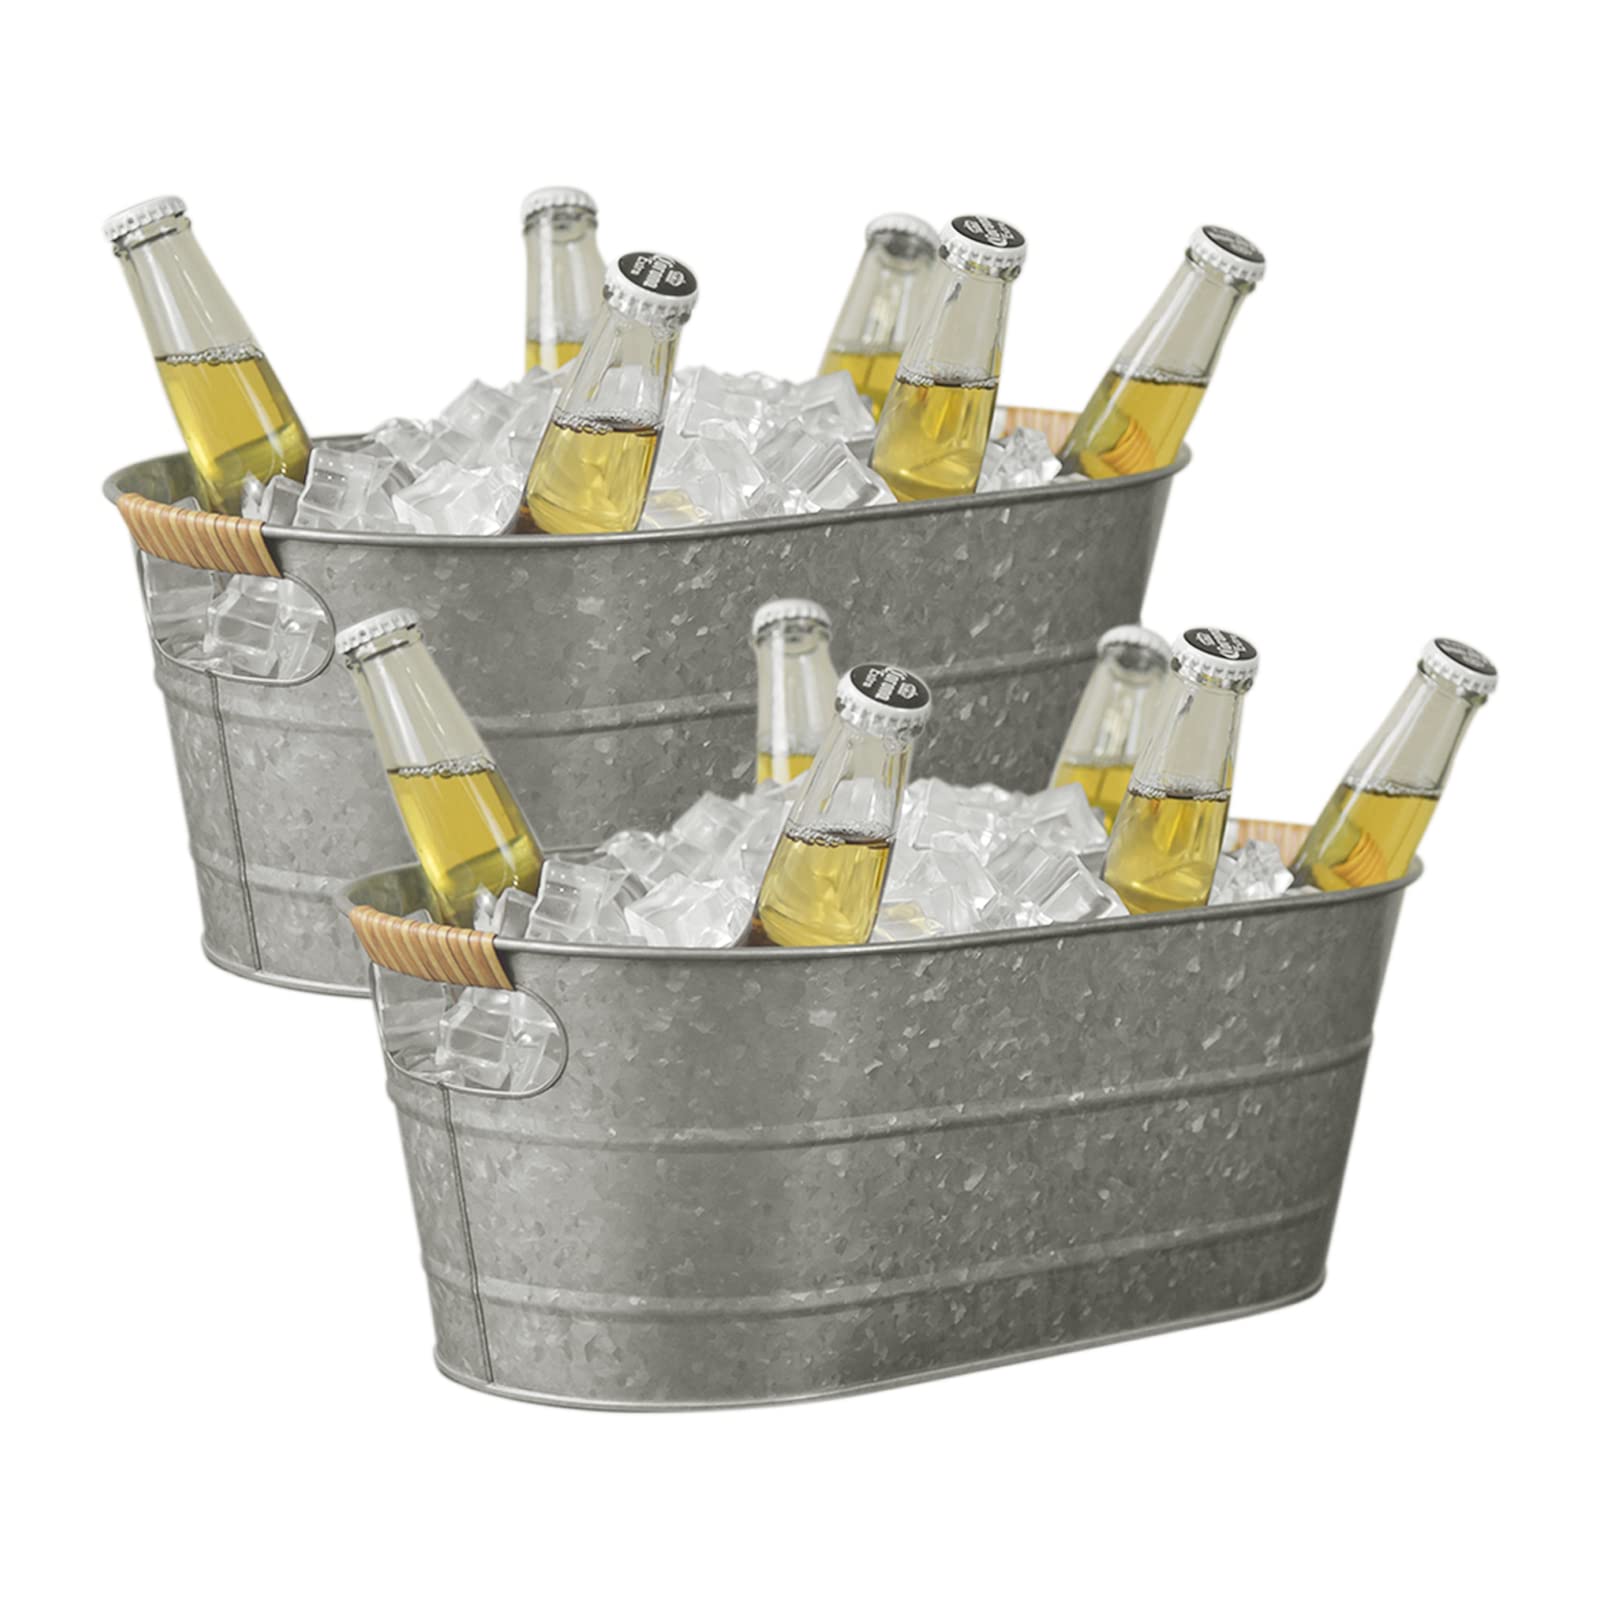 2 Pack Farmhouse Metal Galvanized Beverage Tub, Beer, Wine, Ice Holder - Ice Buckets for Parties,1.45 Gallons Rustic Vintage Storage Oval Bucket Bin - Galvanized/Cutout Handle with PE Rattan